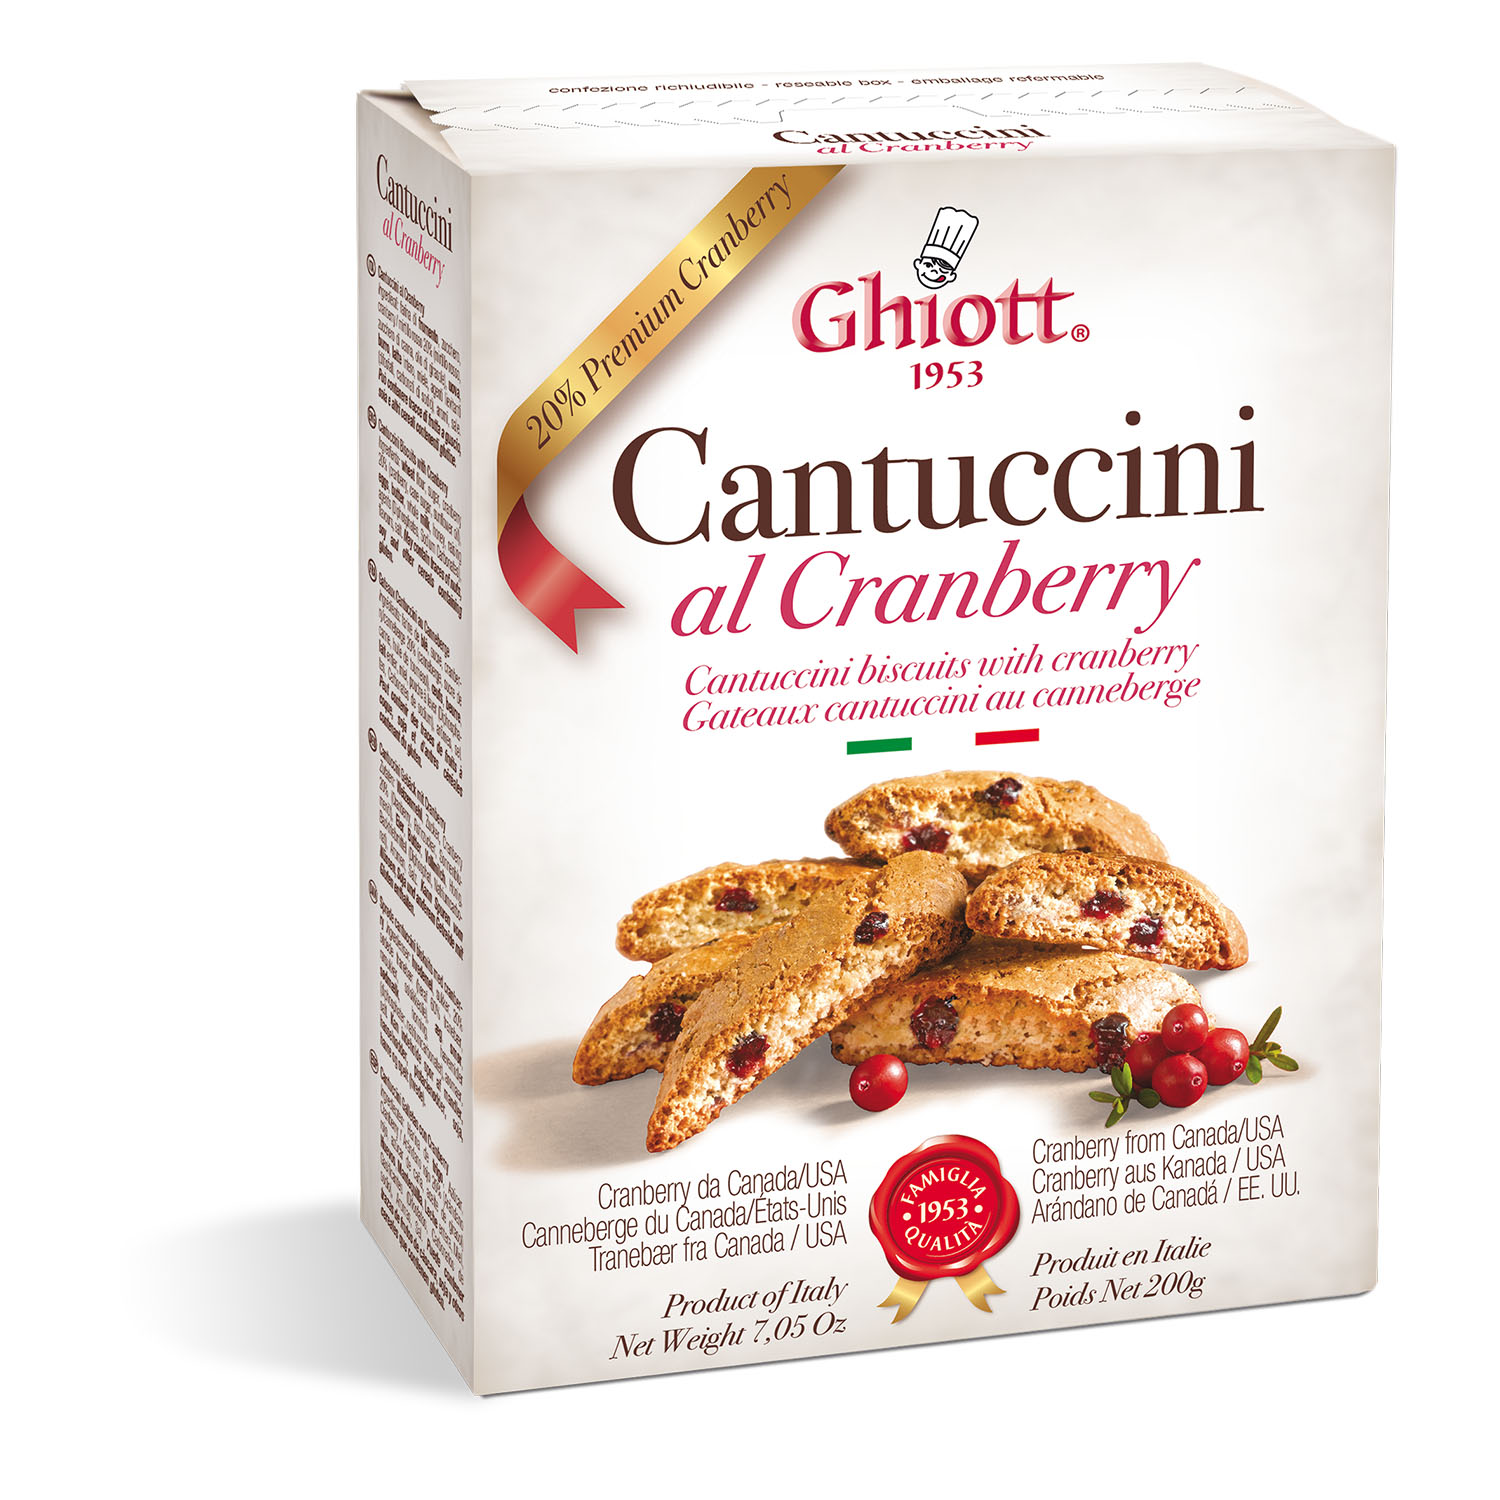 https://www.ghiott.it/wp-content/uploads/2021/03/cantuccini-cranberry.jpg